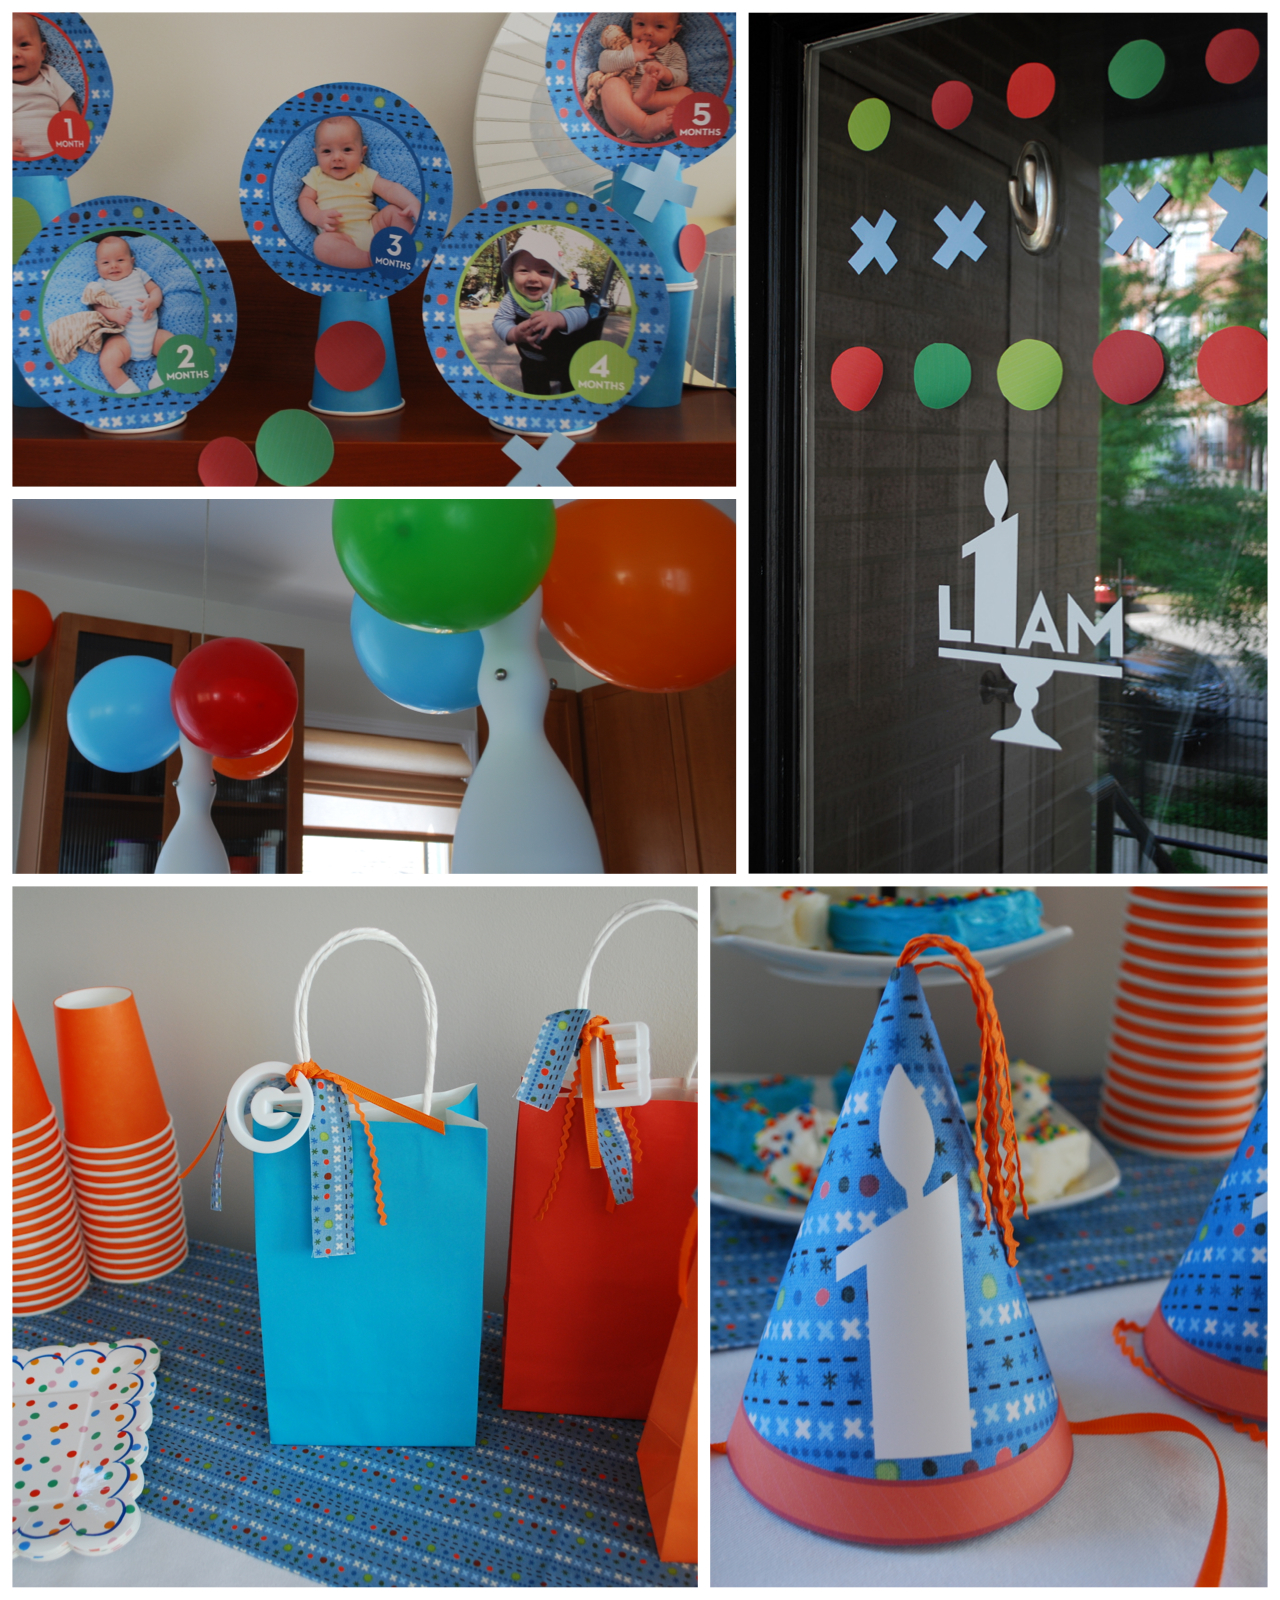 Pin on Party Ideas